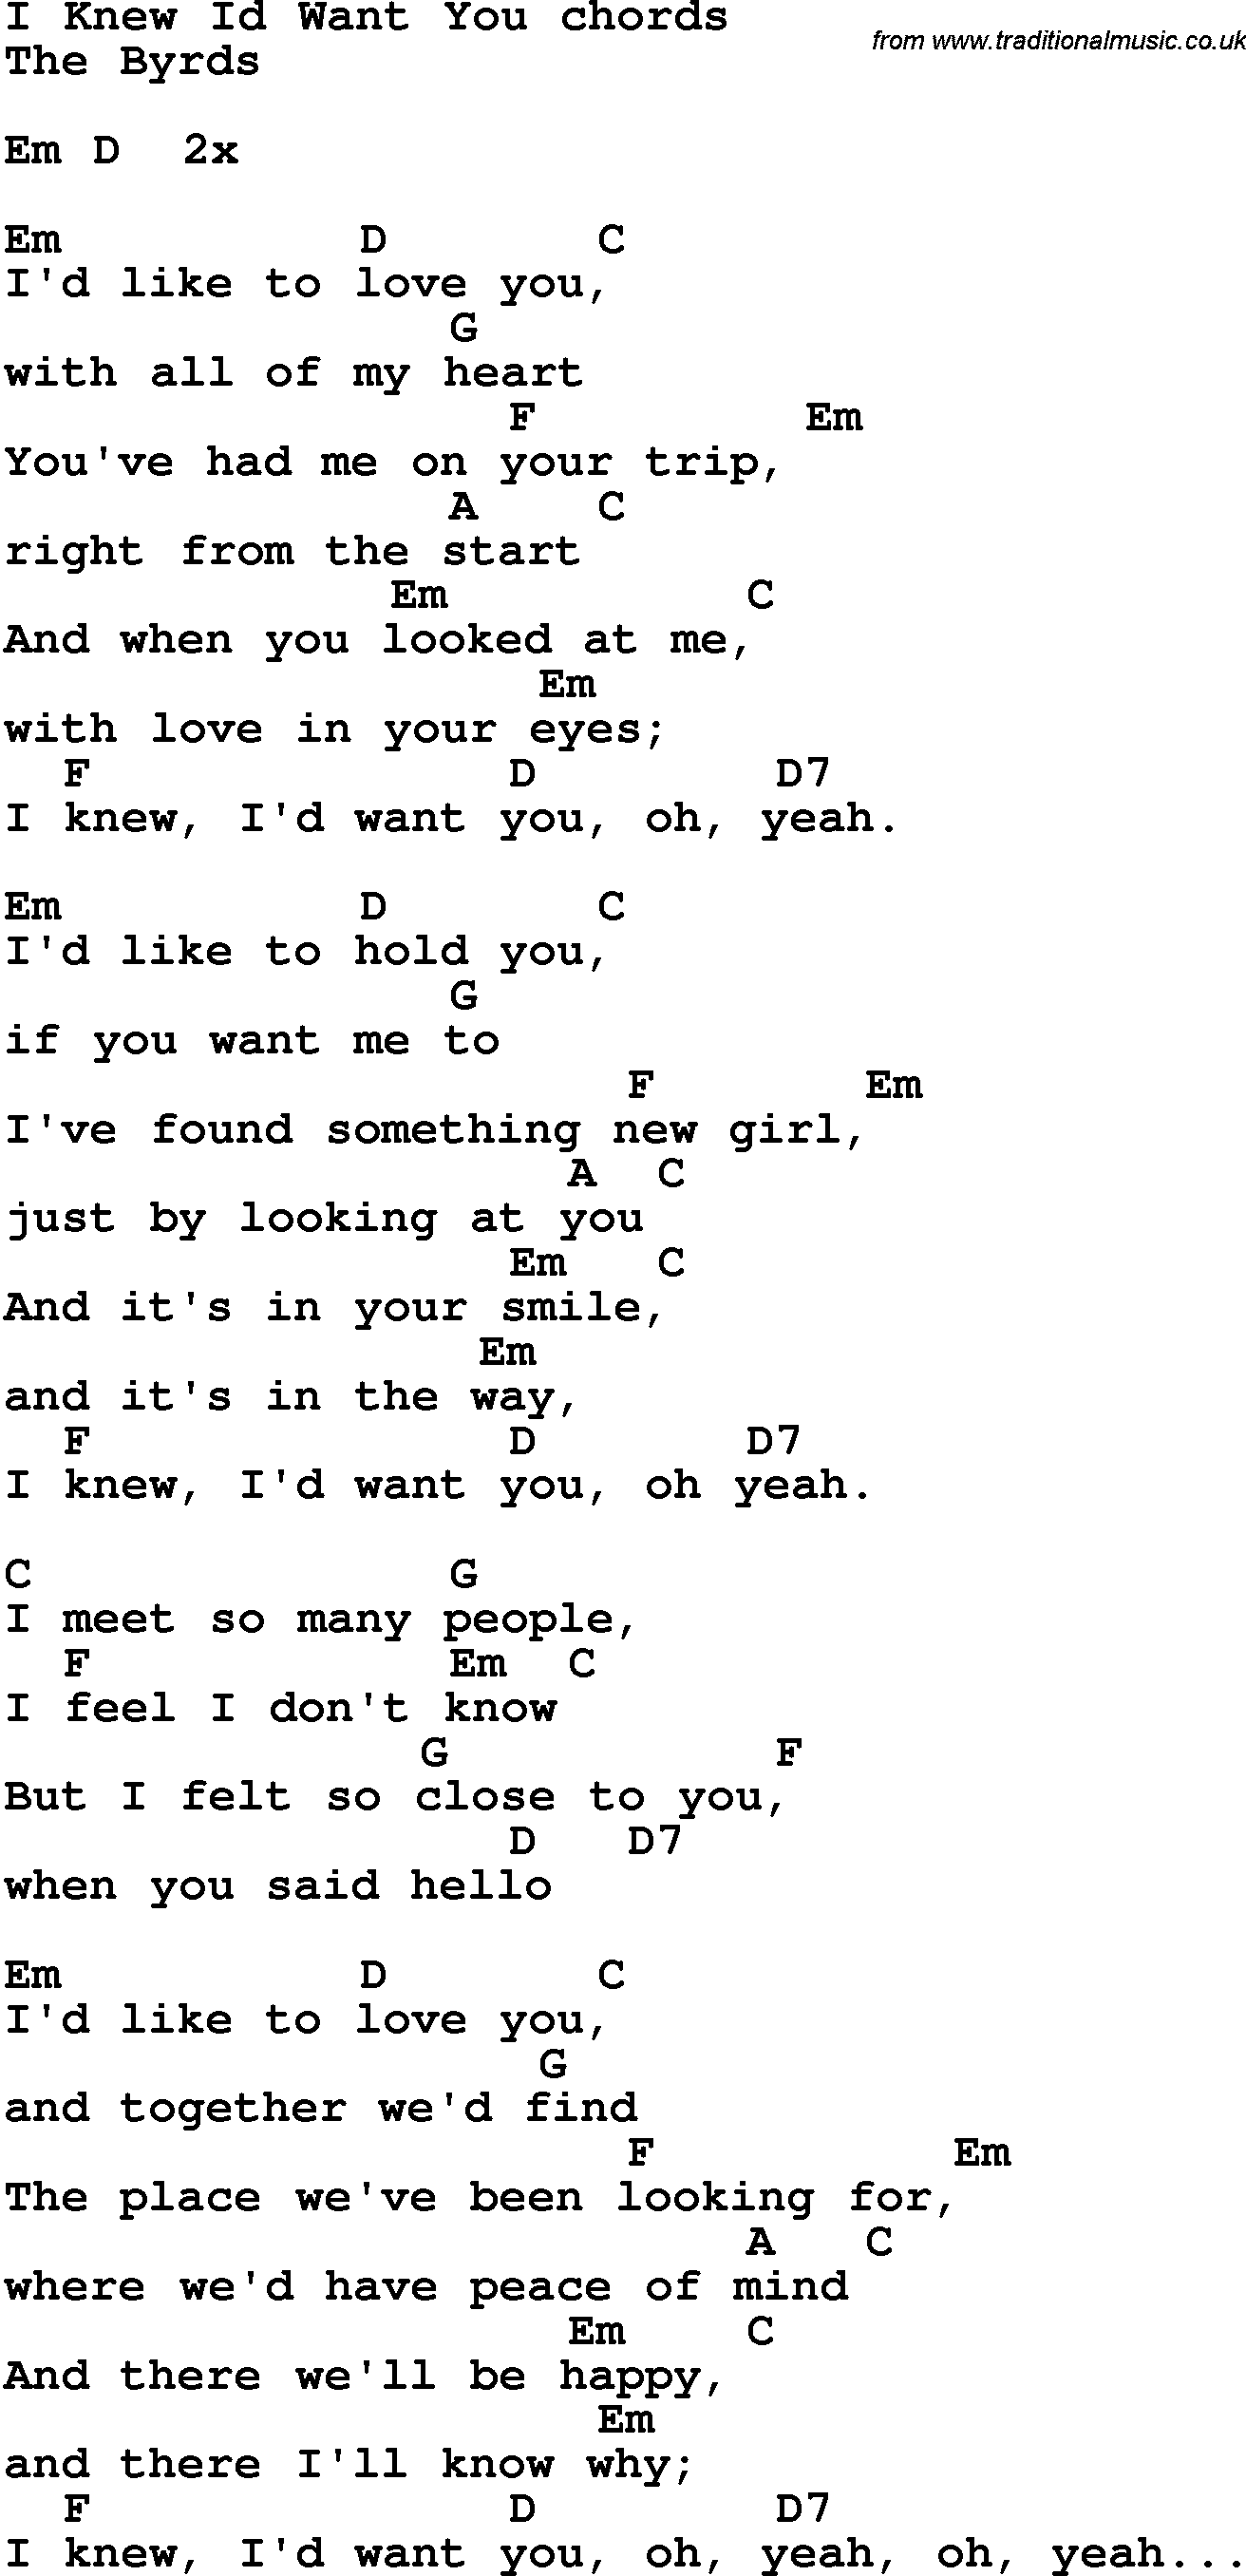 Song Lyrics with guitar chords for I Knew I'd Want You